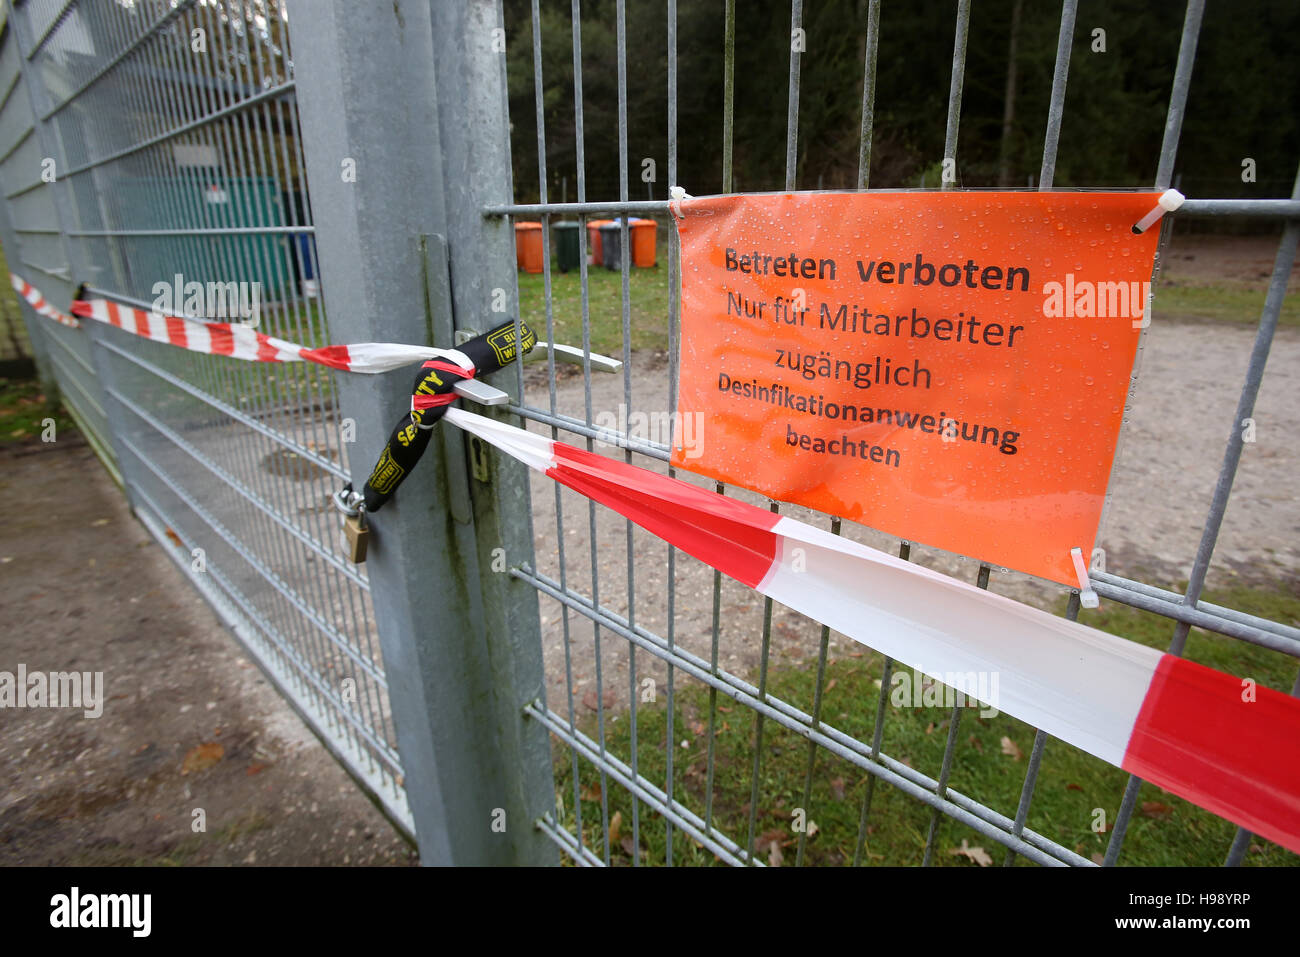 Dithmarschen, Germany. 20th Nov, 2016. A locked and secured gate with a sign reading 'Betreten verboten - Nur fuer Mitarbeiter zugaenglich - Desinfektionsanweisung beachten' (lit. 'No admittance - Access only for employees - Beware the disinfection instruction') can be seen at a poultry farm in Dithmarschen, Germany, 20 November 2016. The bird flu virus was detected at two farms of the poultry company. A total of 8,800 geese is now prepared to be killed. PHOTO: BODO MARKS/dpa/Alamy Live News Stock Photo